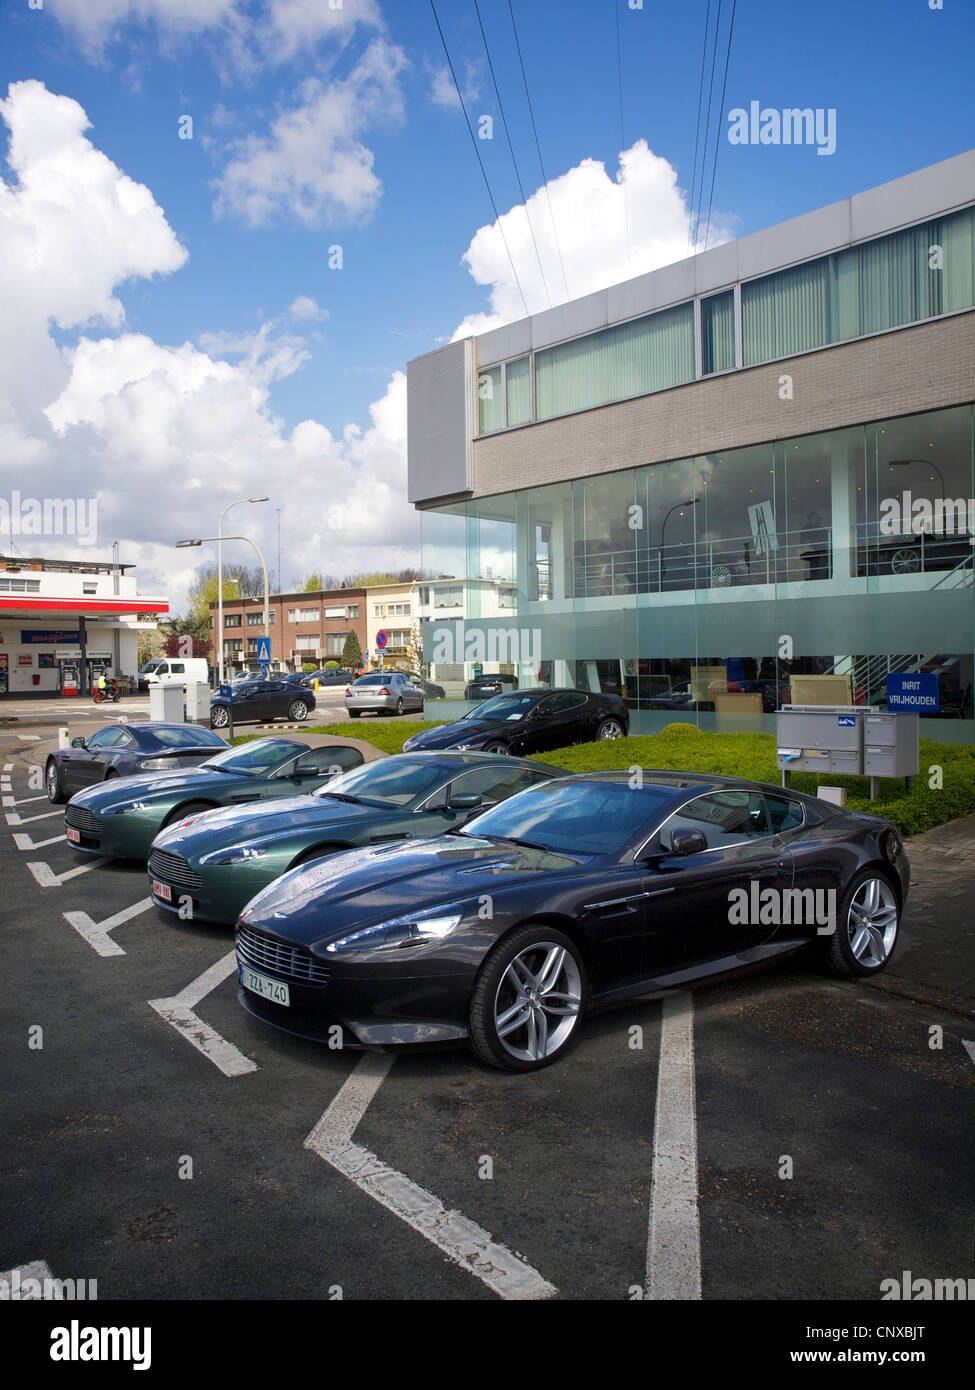 Aston Martin dealership in Antwerp, Belgium, with various models parked out front Stock Photo